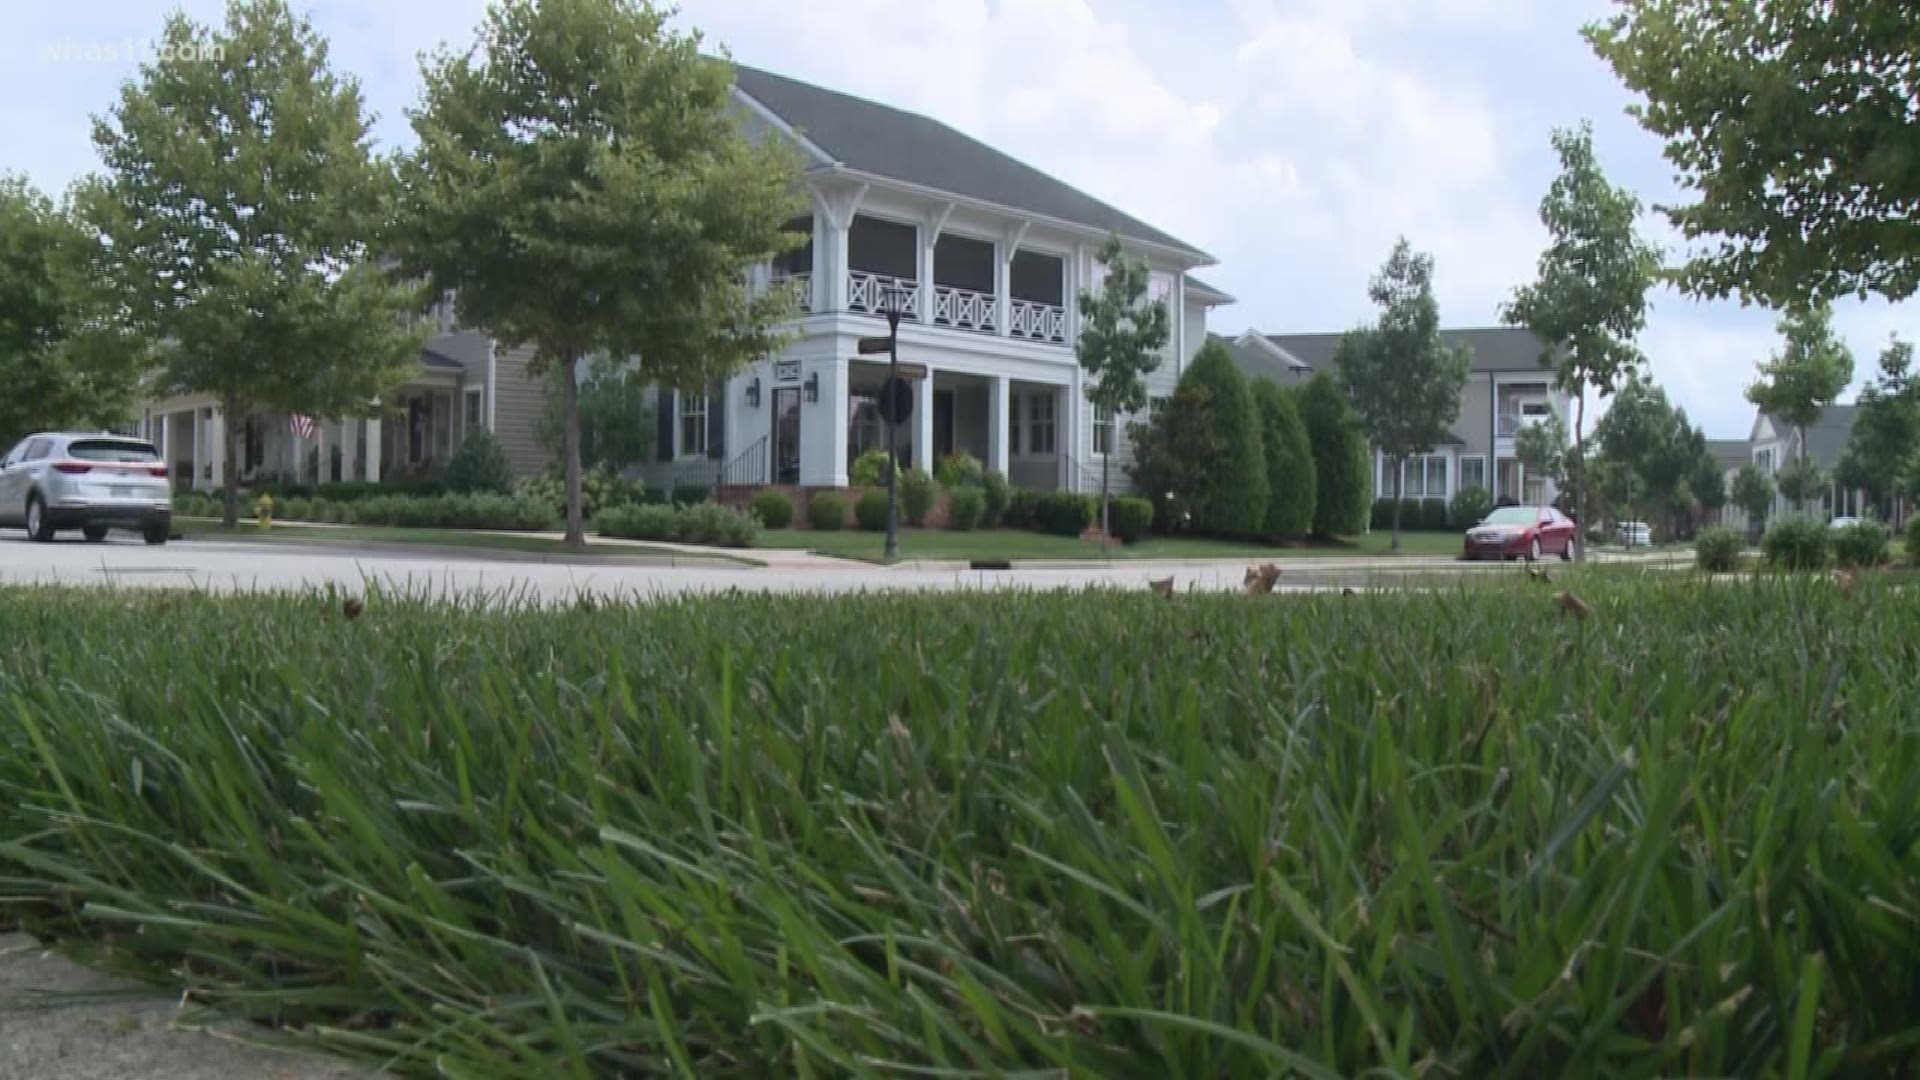 After 2 recent abduction attempts, police and parents in Norton Commons are on high alert.